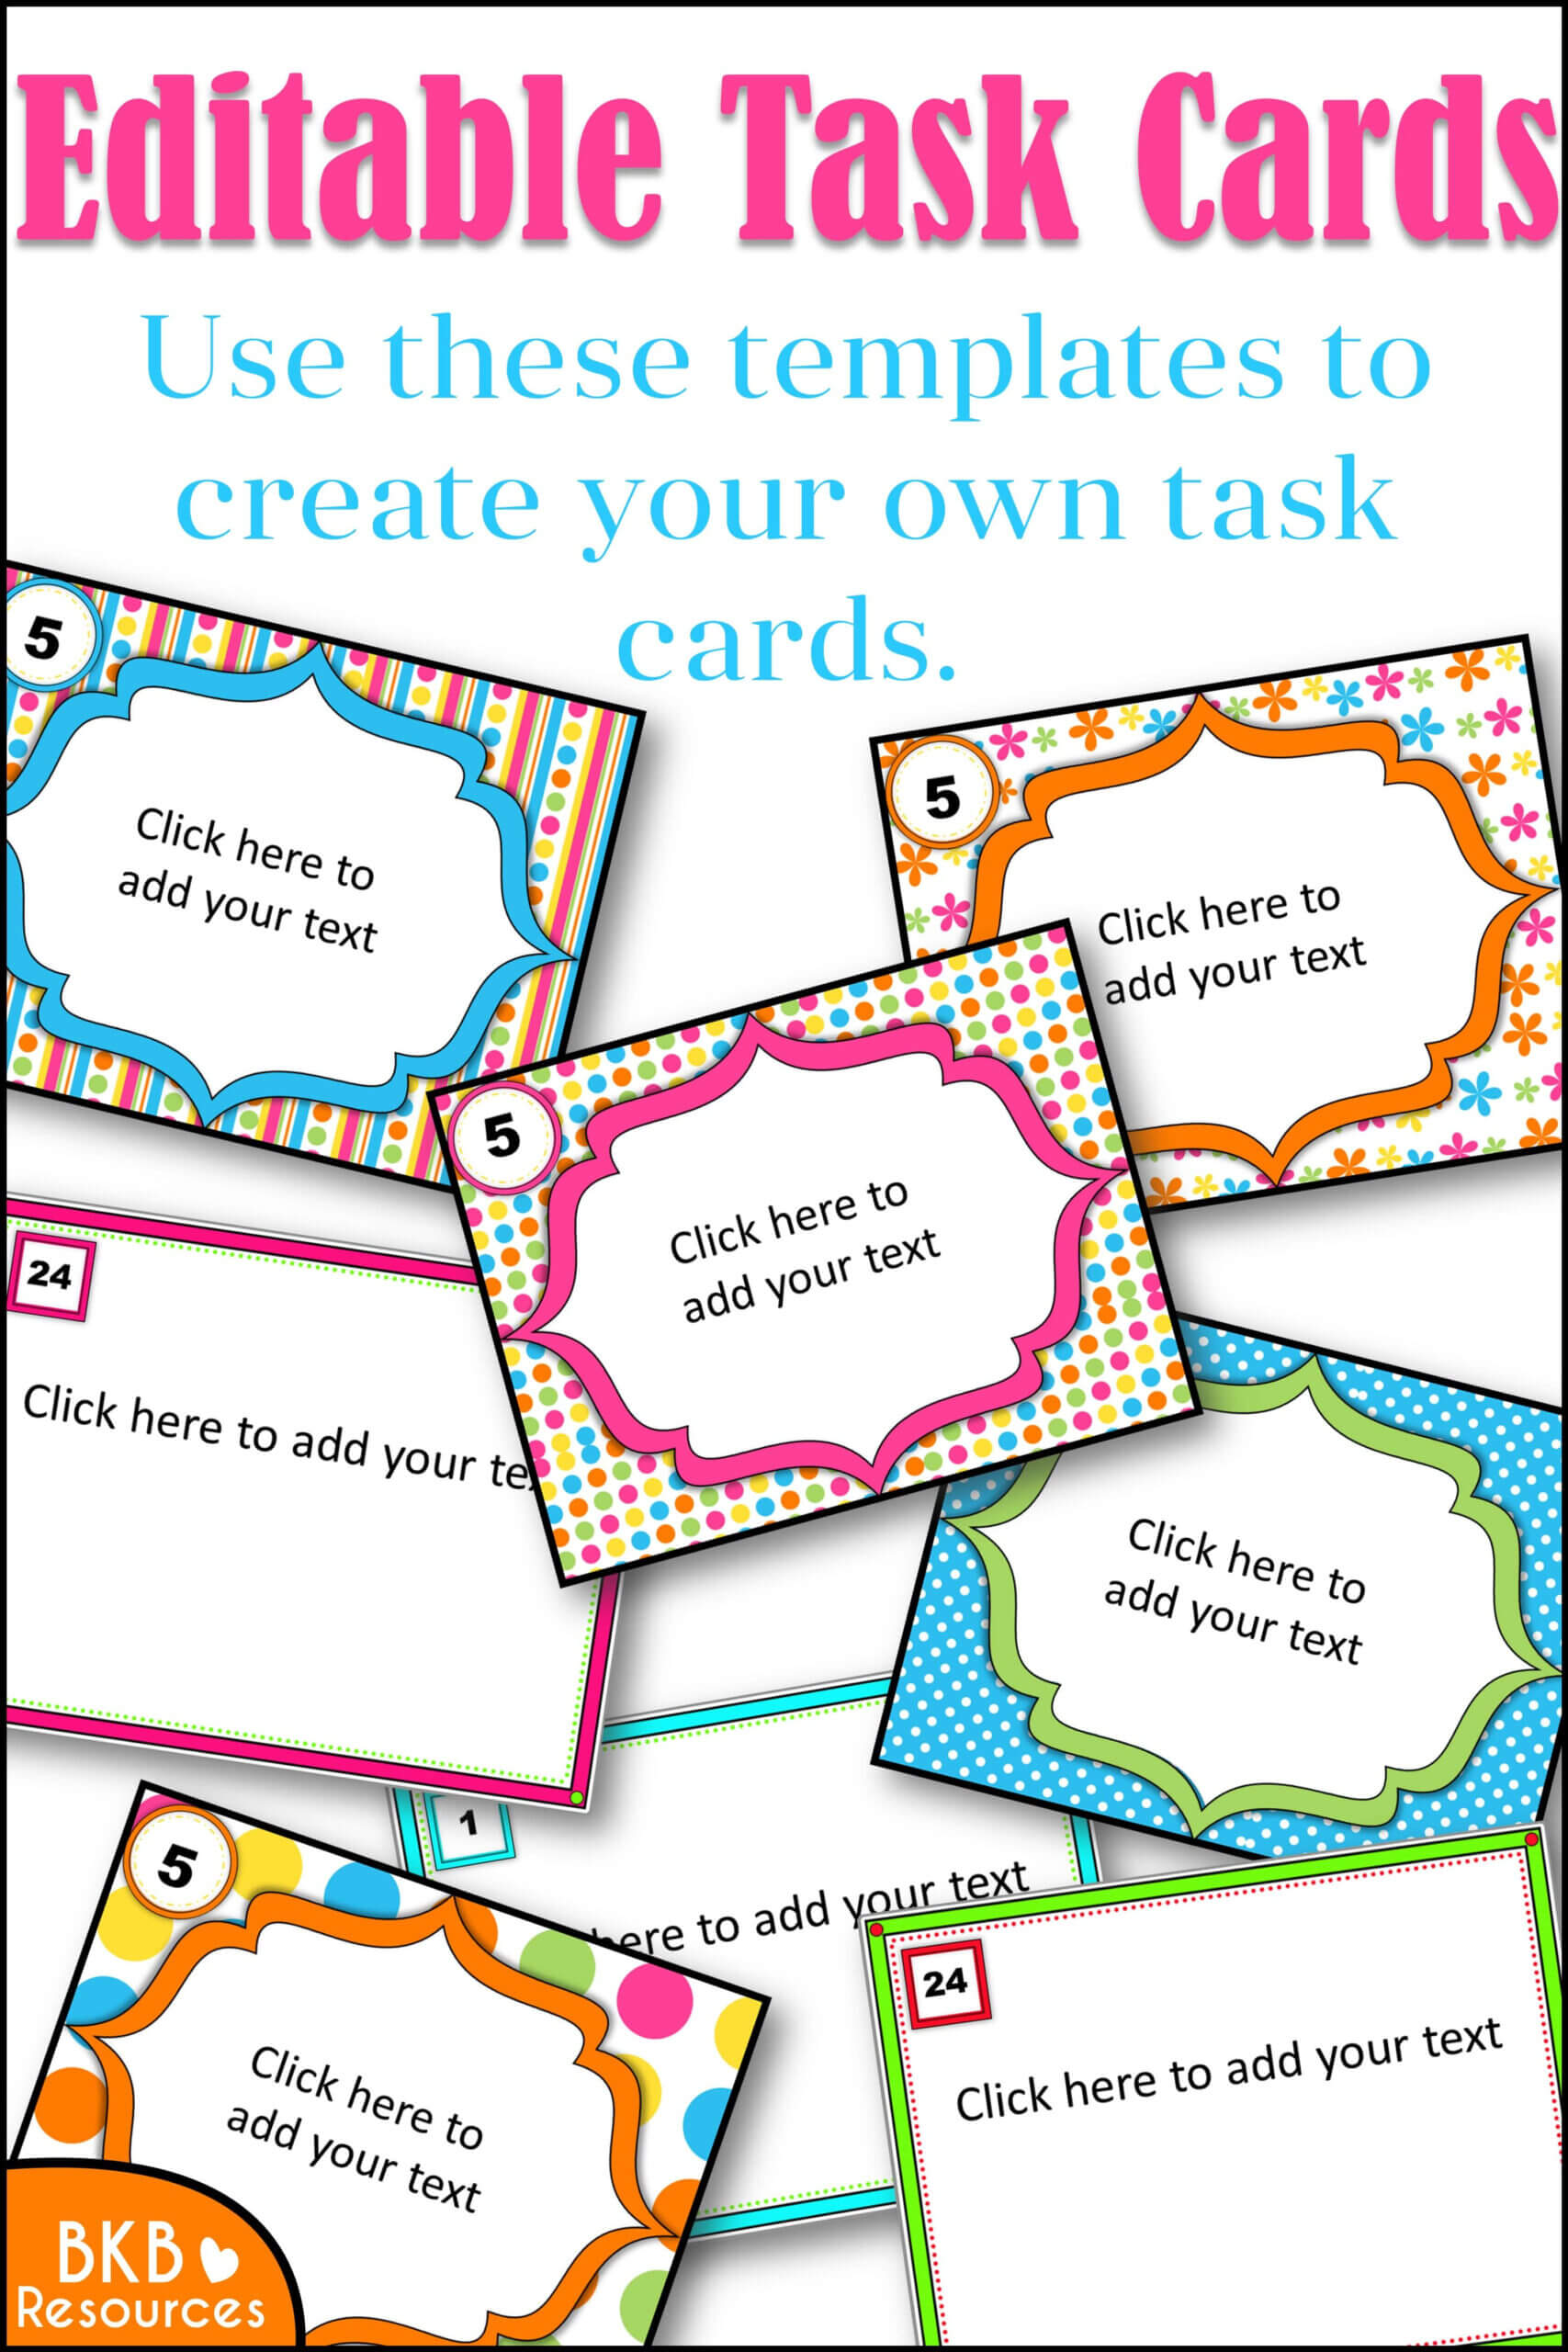 Editable Task Card Templates - Bkb Resources With Task Cards Template